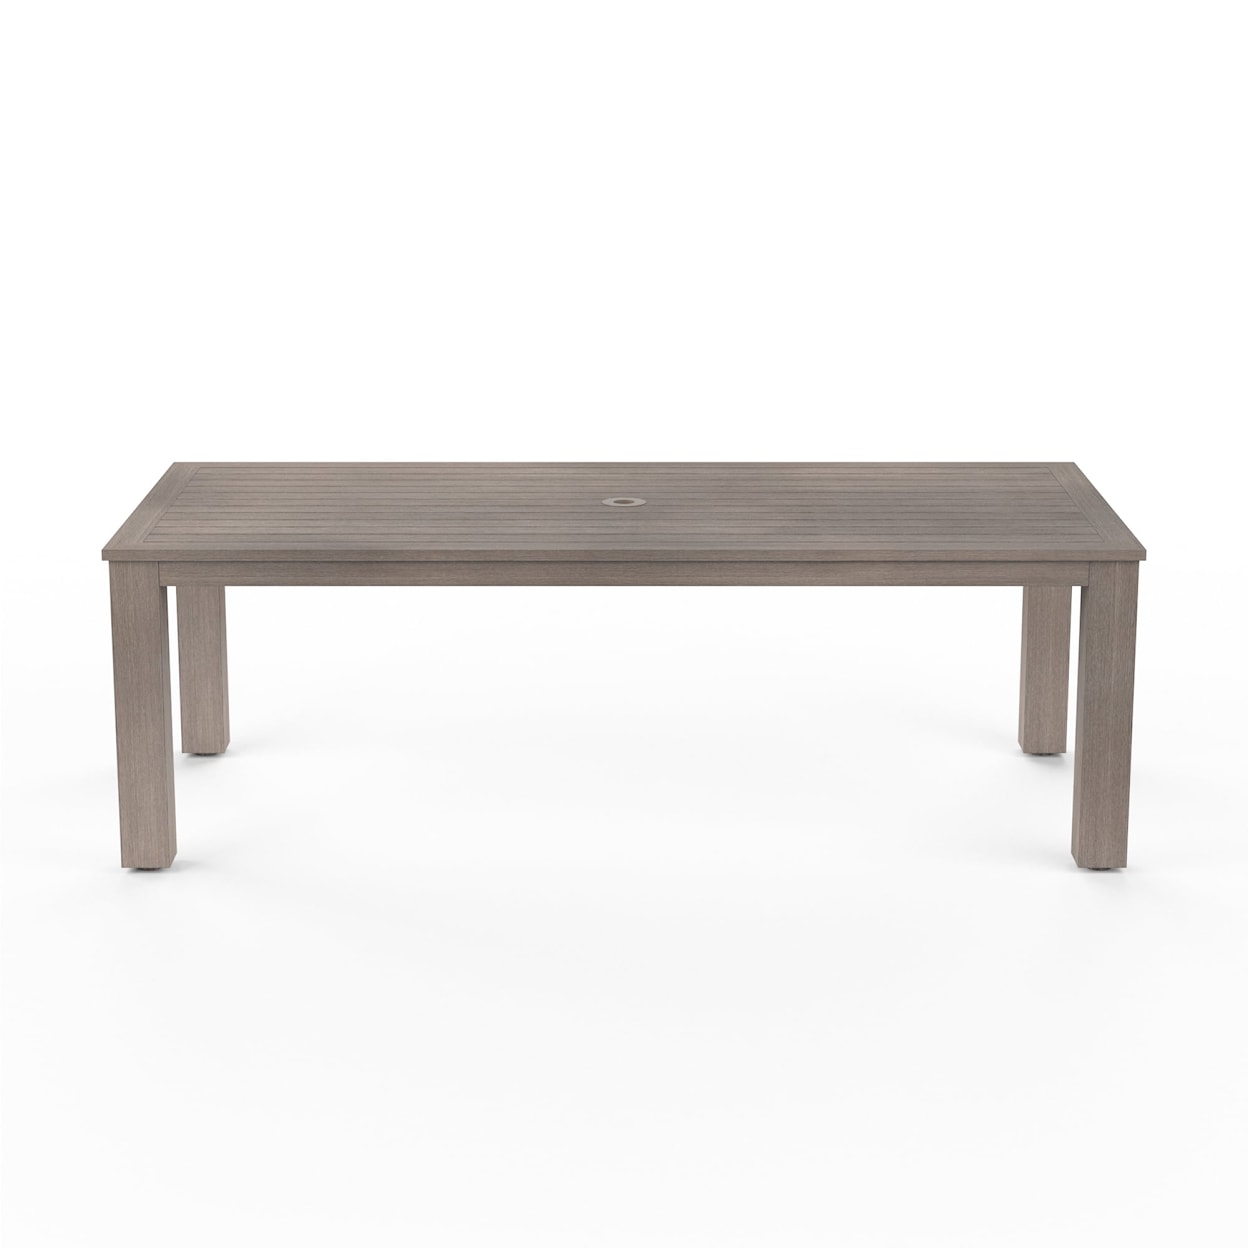 Sunset West Laguna Outdoor 90" Dining Table